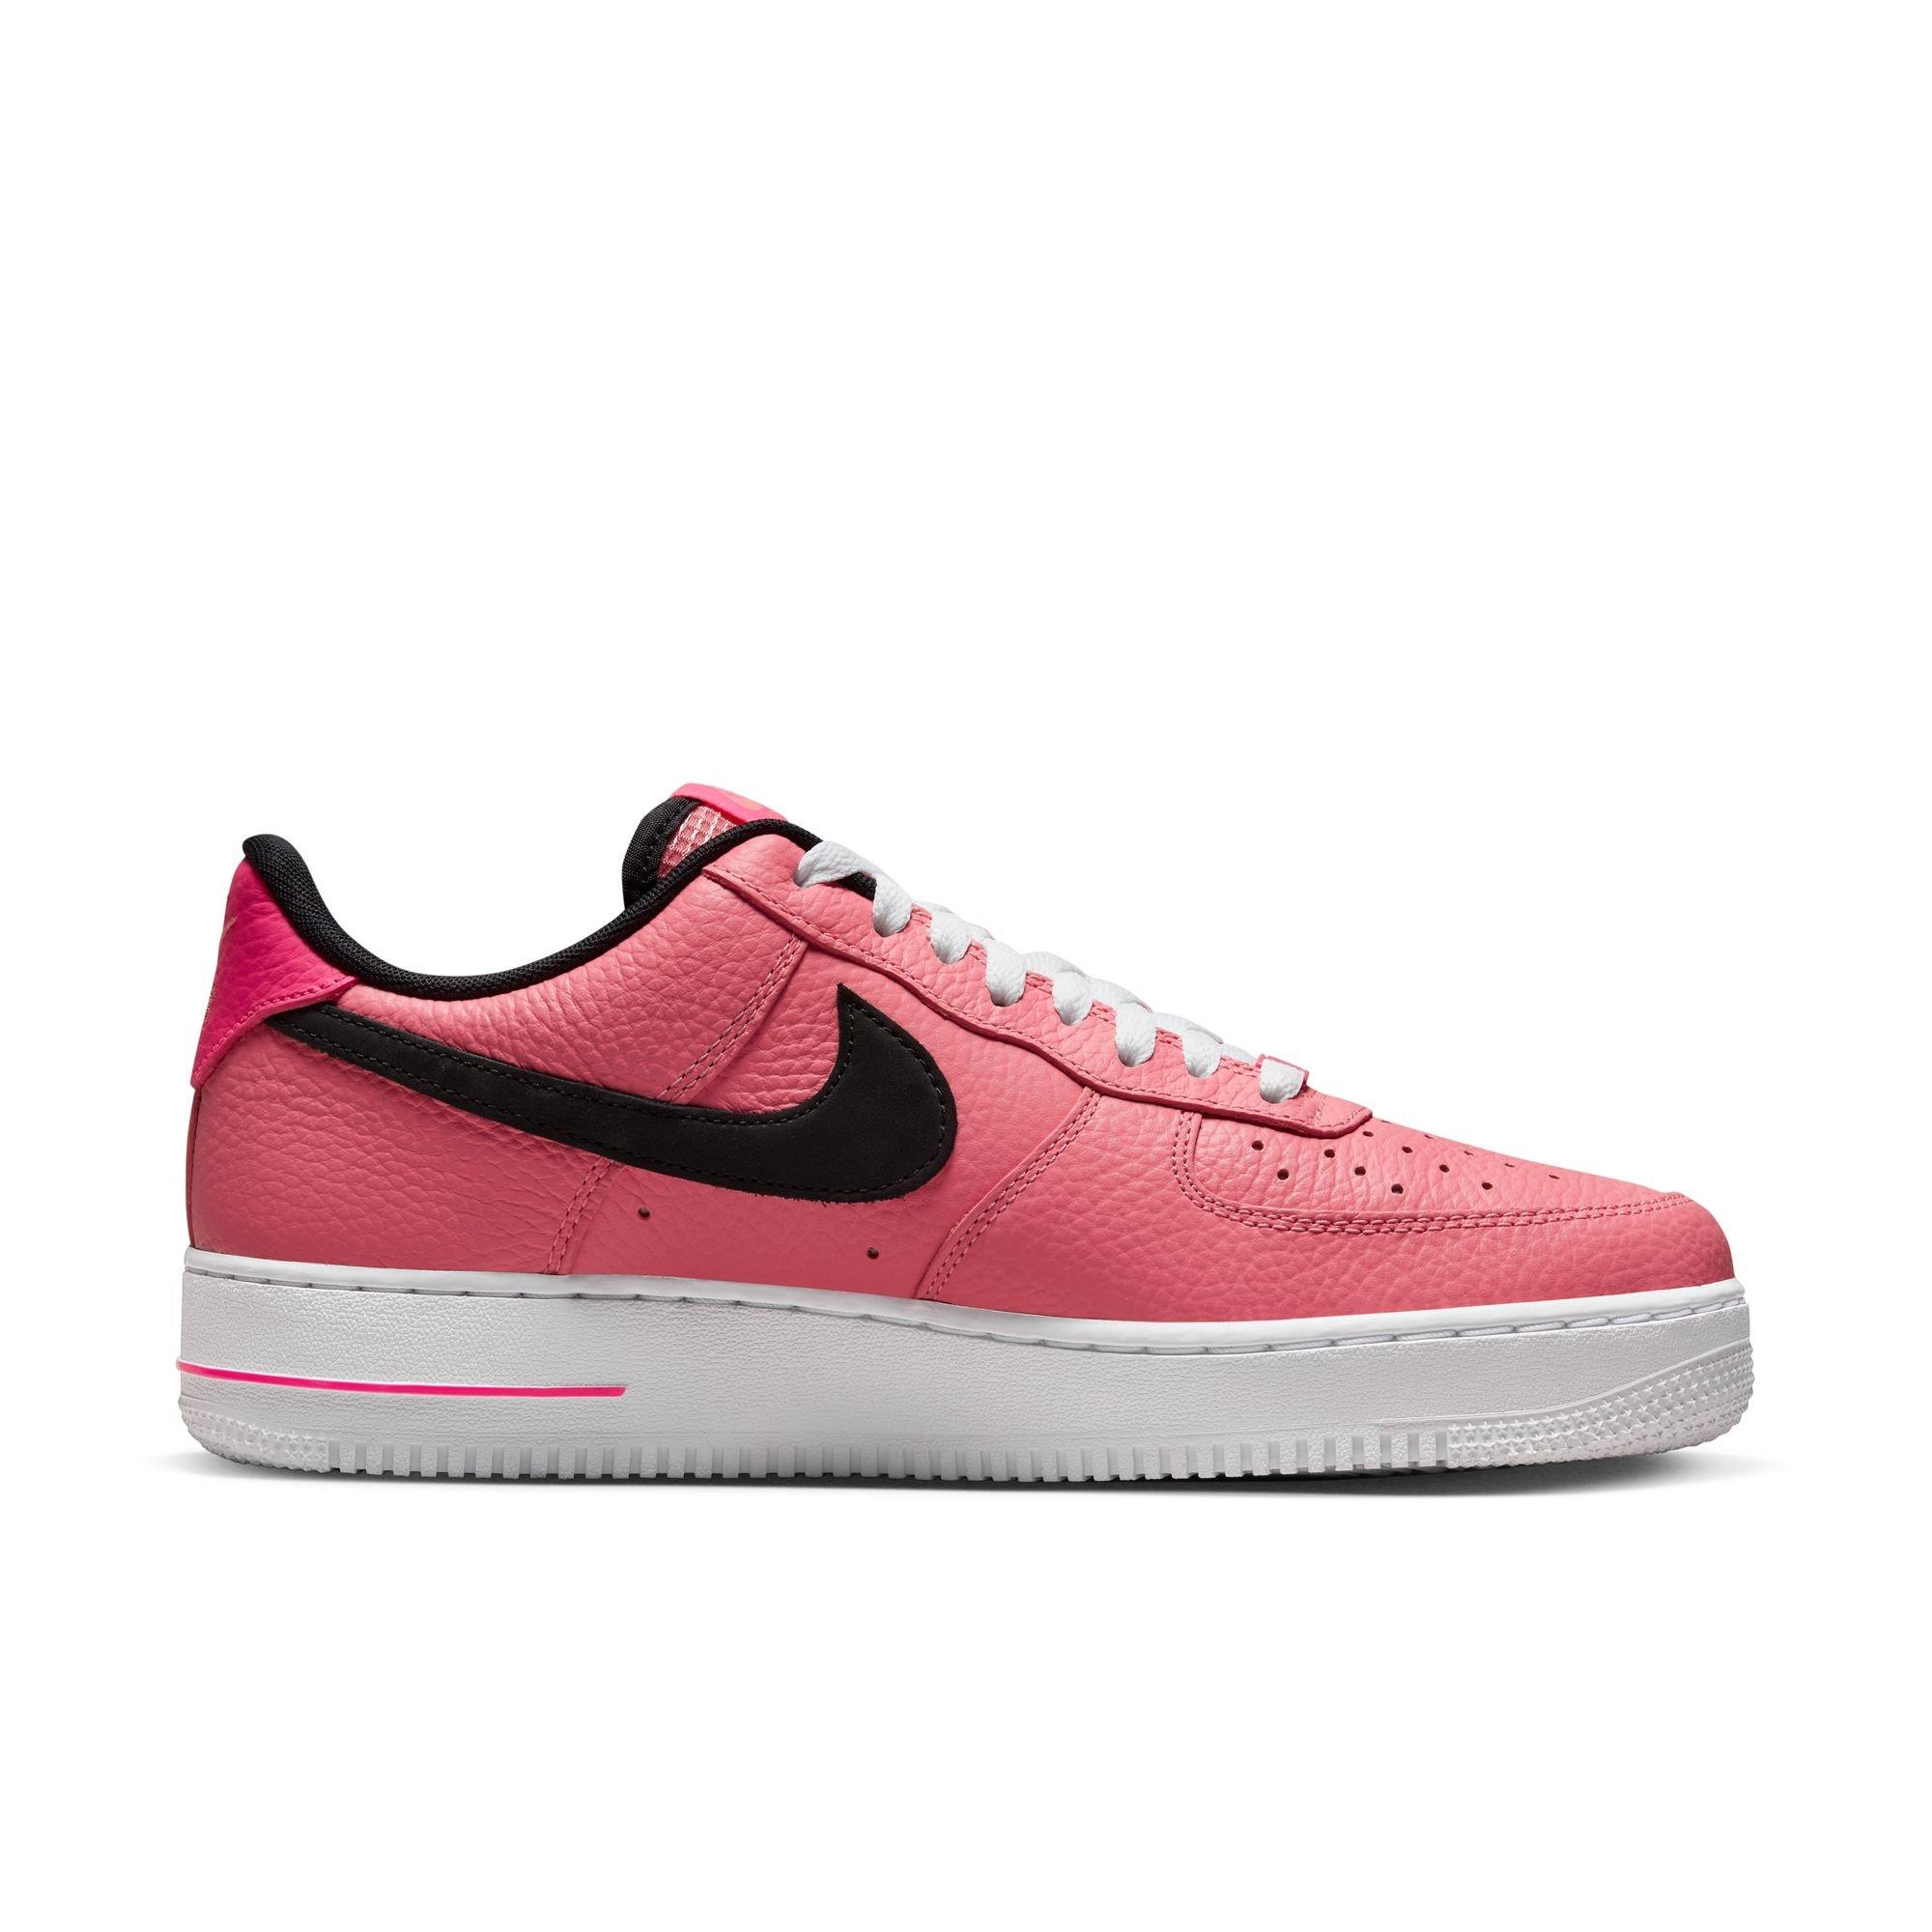 white and pink air force ones men